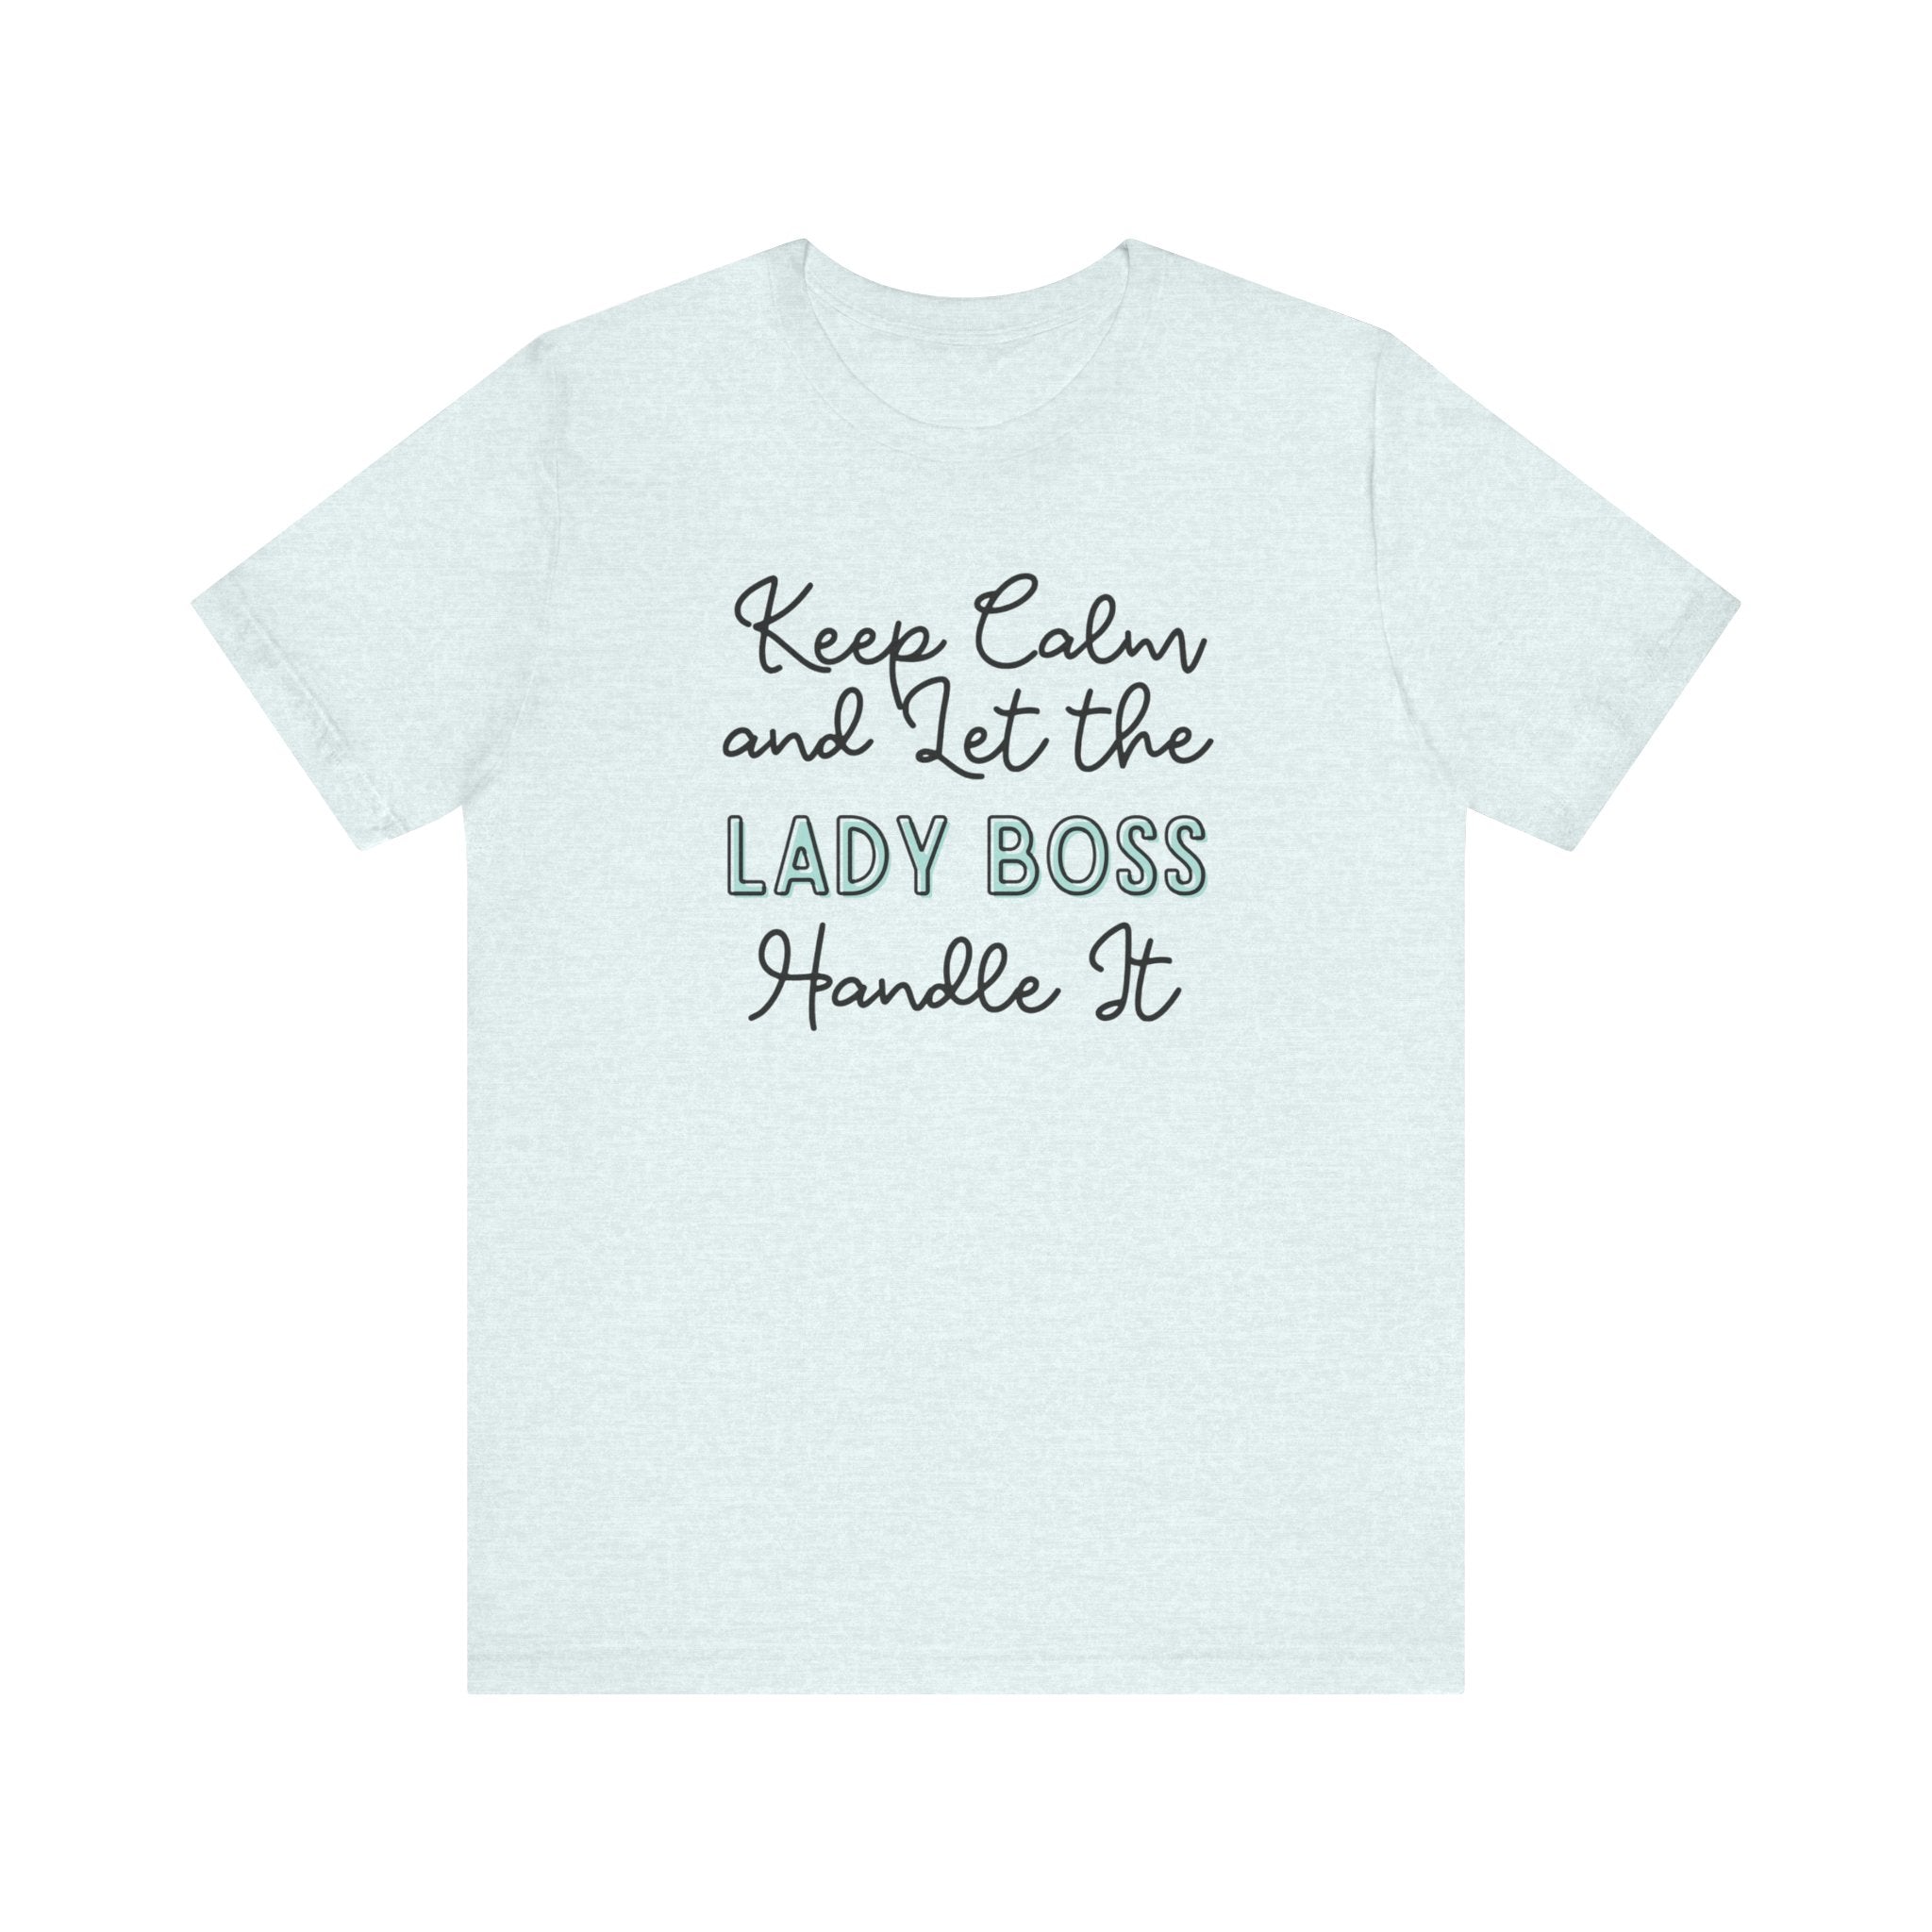 Keep Calm and let the Lady Boss handle It - Jersey Short Sleeve Tee